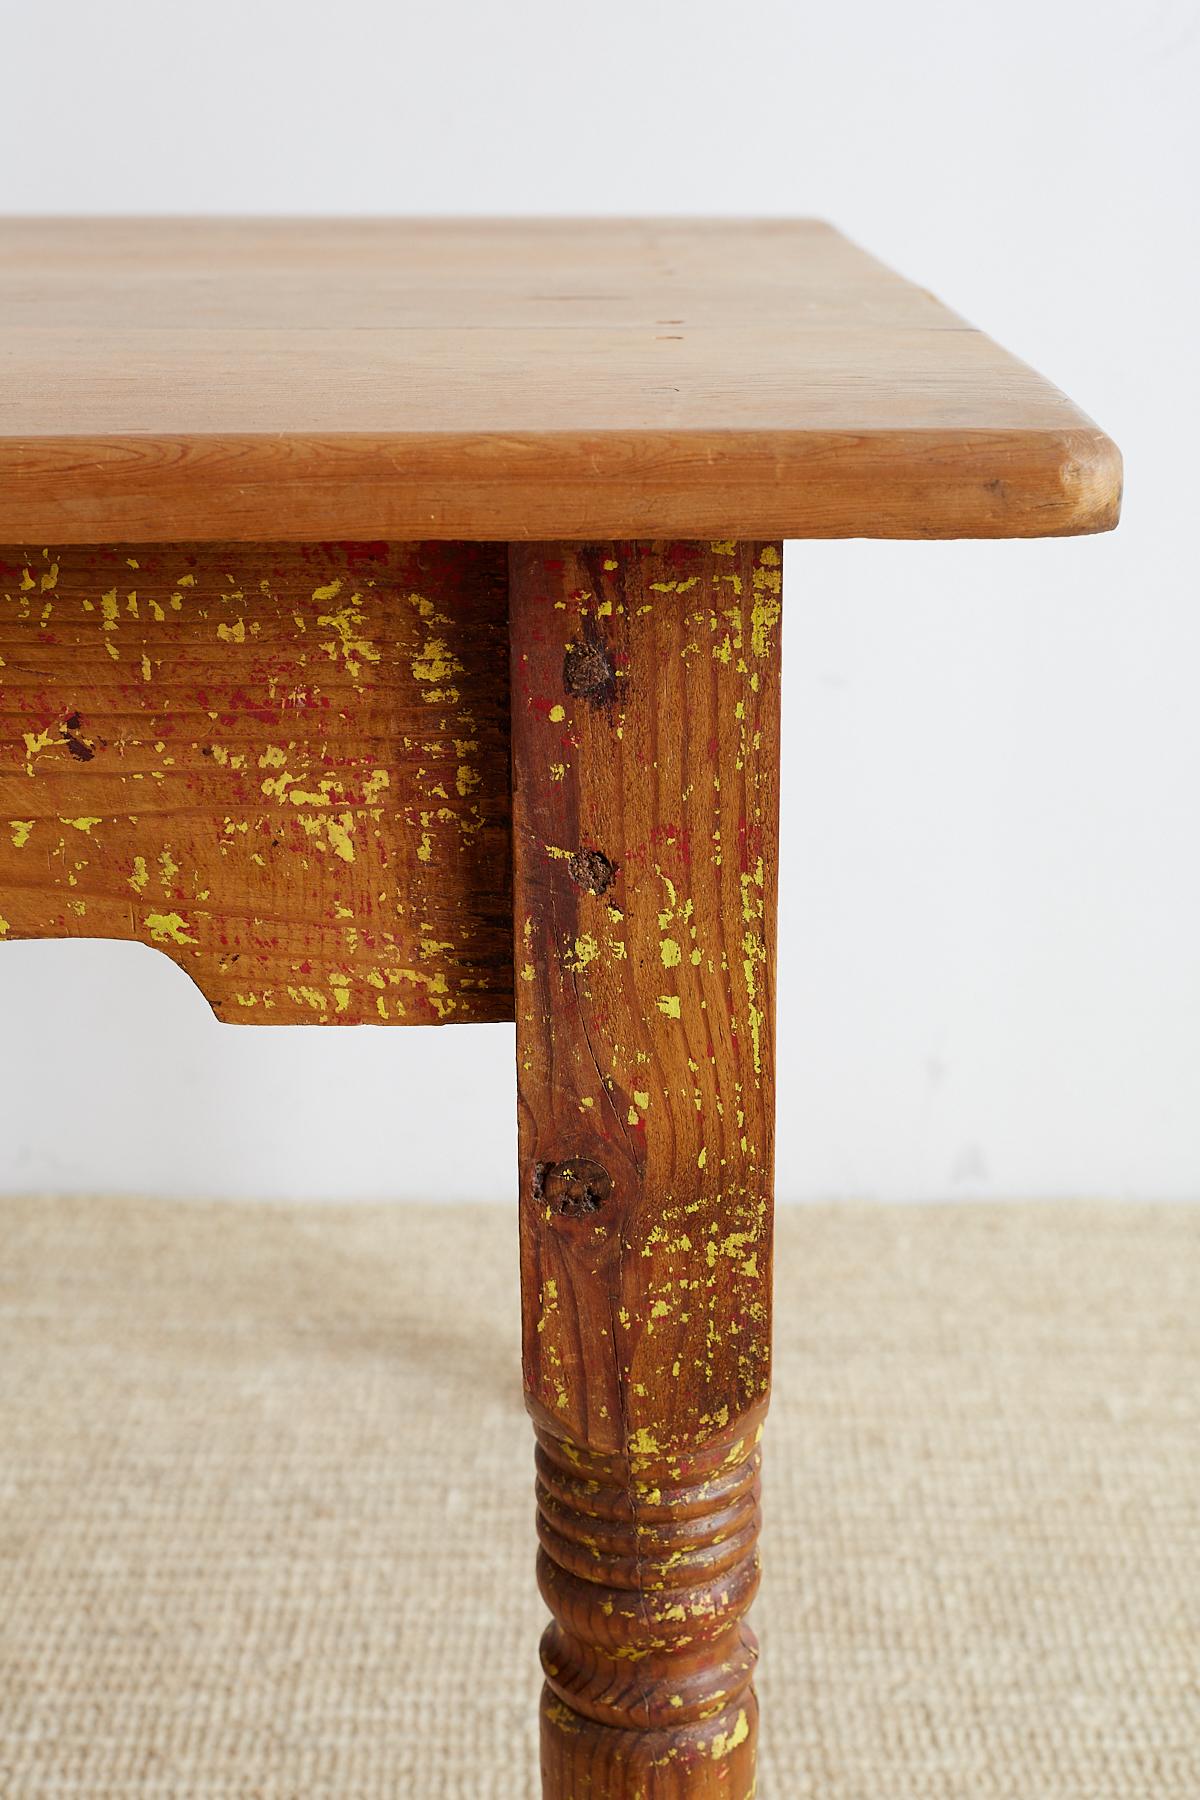 20th Century Rustic Pine Farm Table with Old Paint Remnants